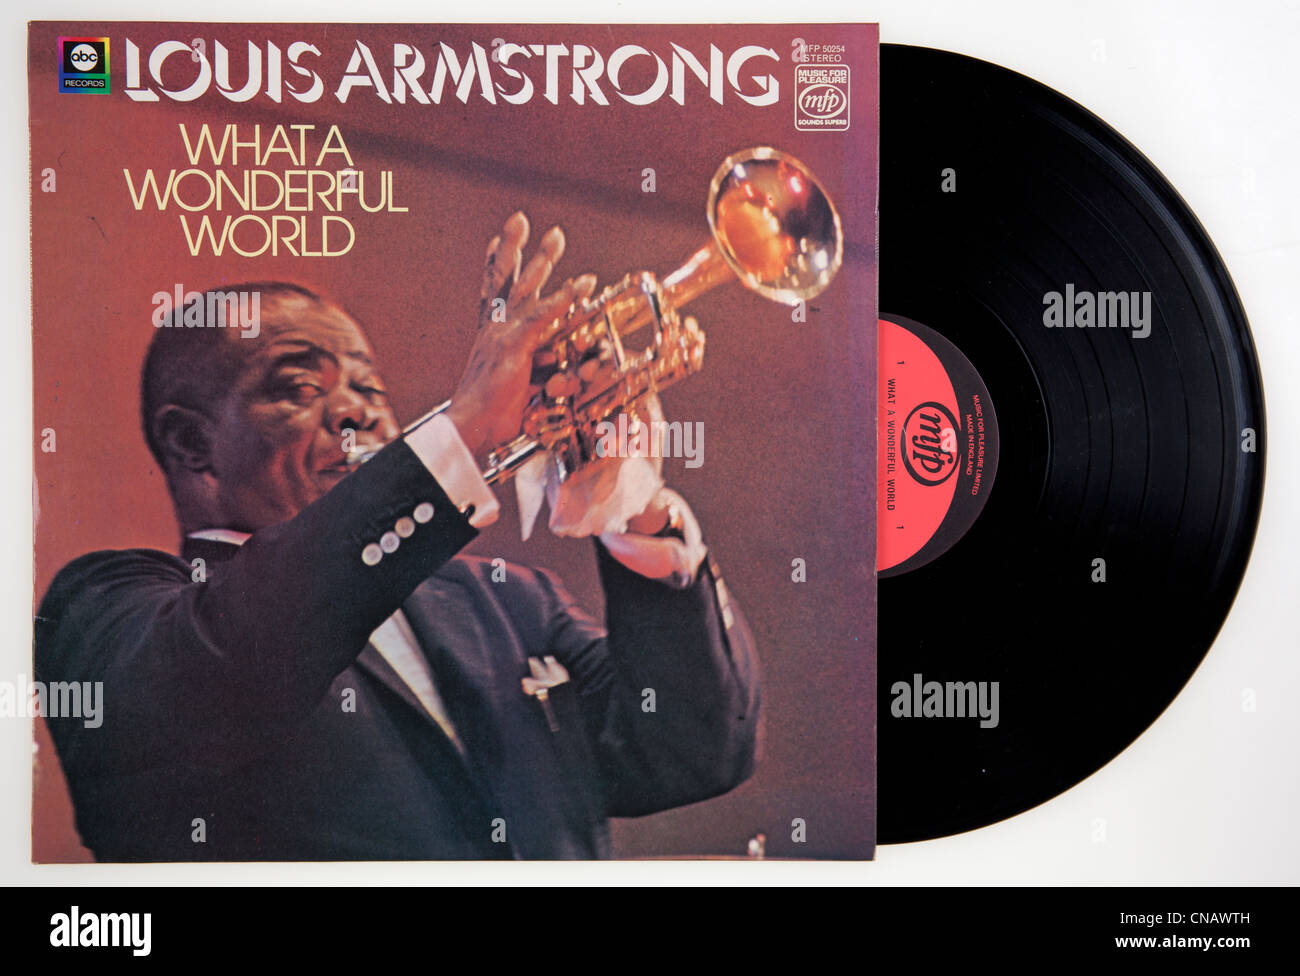 Cover of vinyl album What A Wonderful World by Louis Armstrong Stock Photo: 47568321 - Alamy